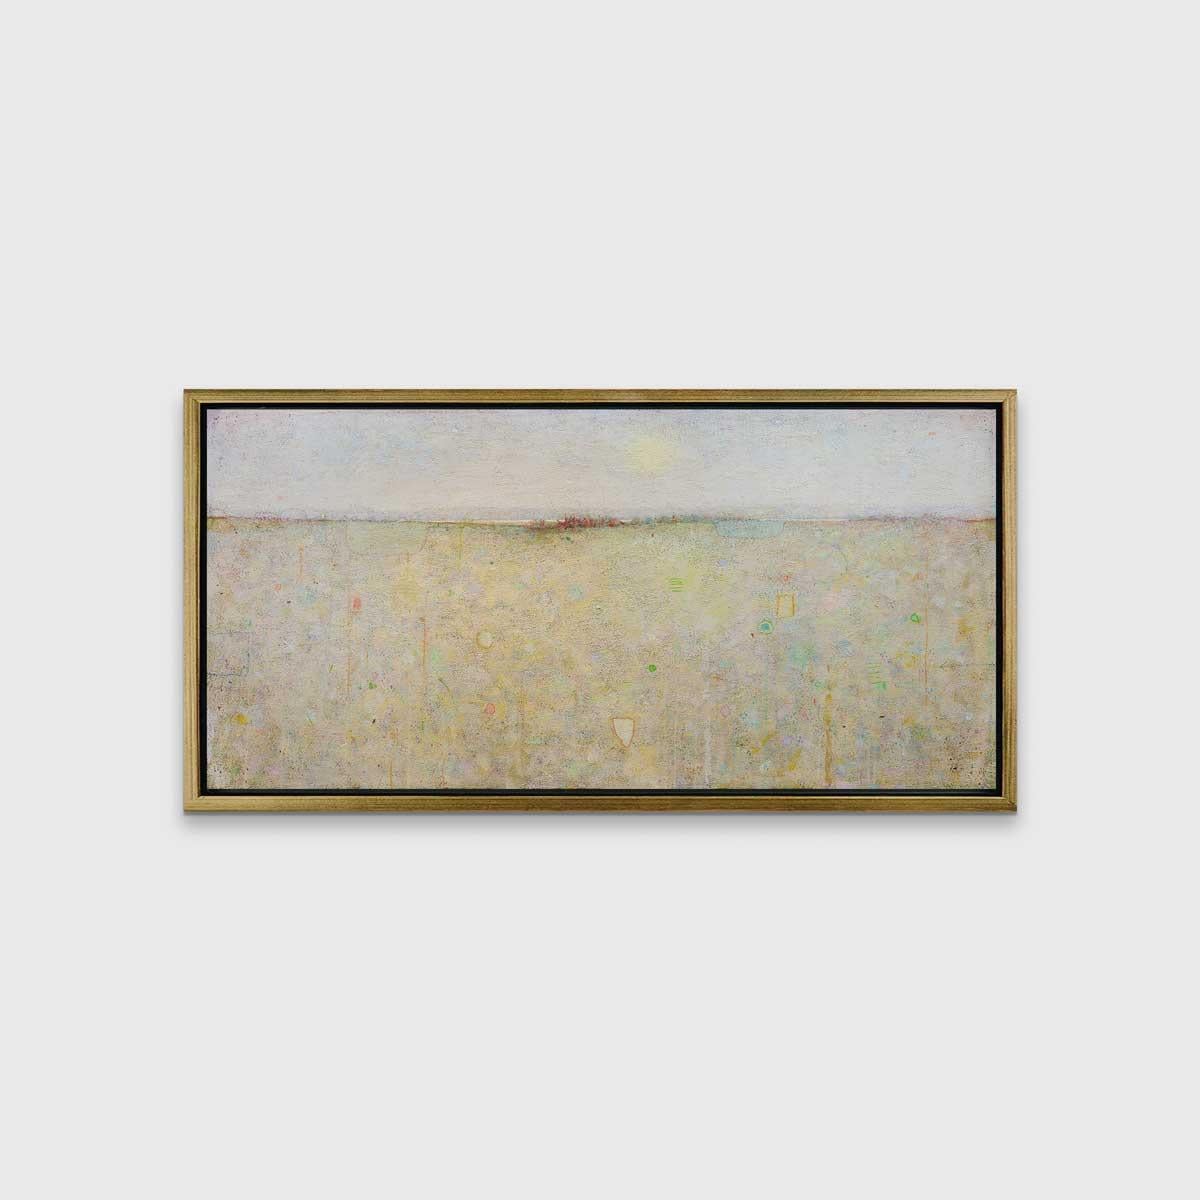 This abstract landscape limited edition print by Elwood Howell features a cool neutral palette. The piece features the artists's signature high horizon line, with layered shapes and strokes beneath it that allows the eye to wander. At the center of